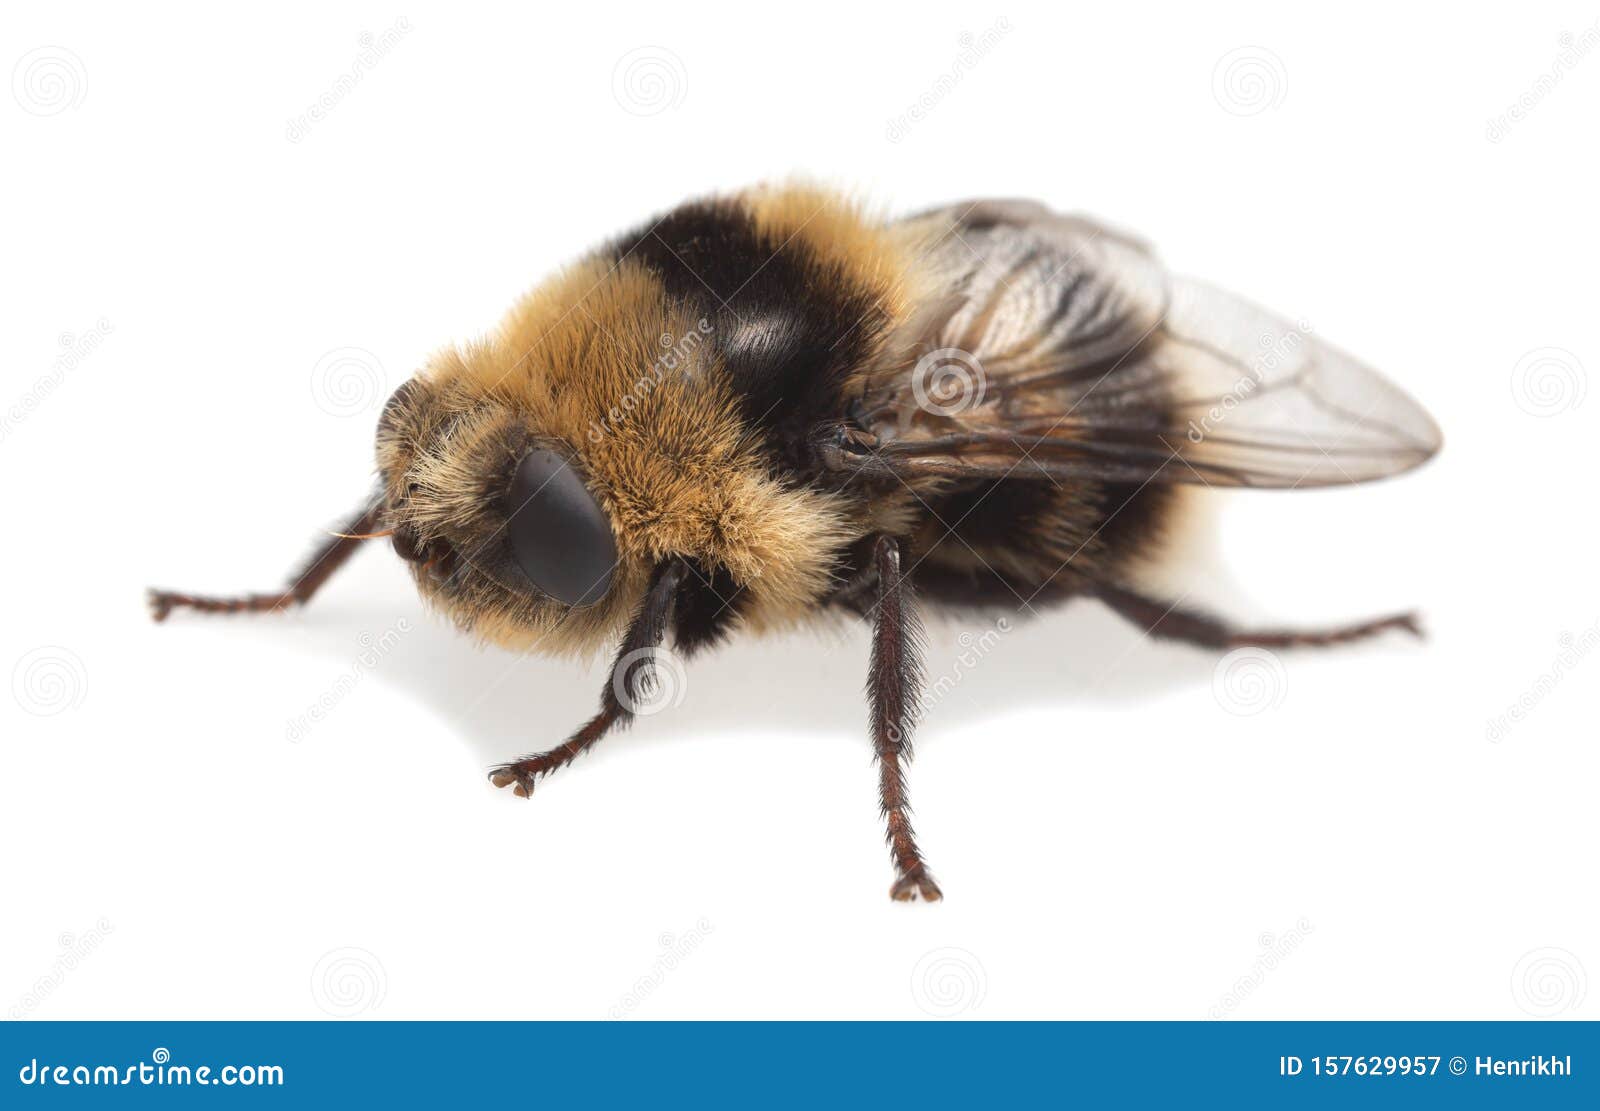 https://thumbs.dreamstime.com/z/adult-moose-nose-botfly-cephenemyia-ulrichii-isolated-white-background-flies-parasitic-other-deers-their-157629957.jpg